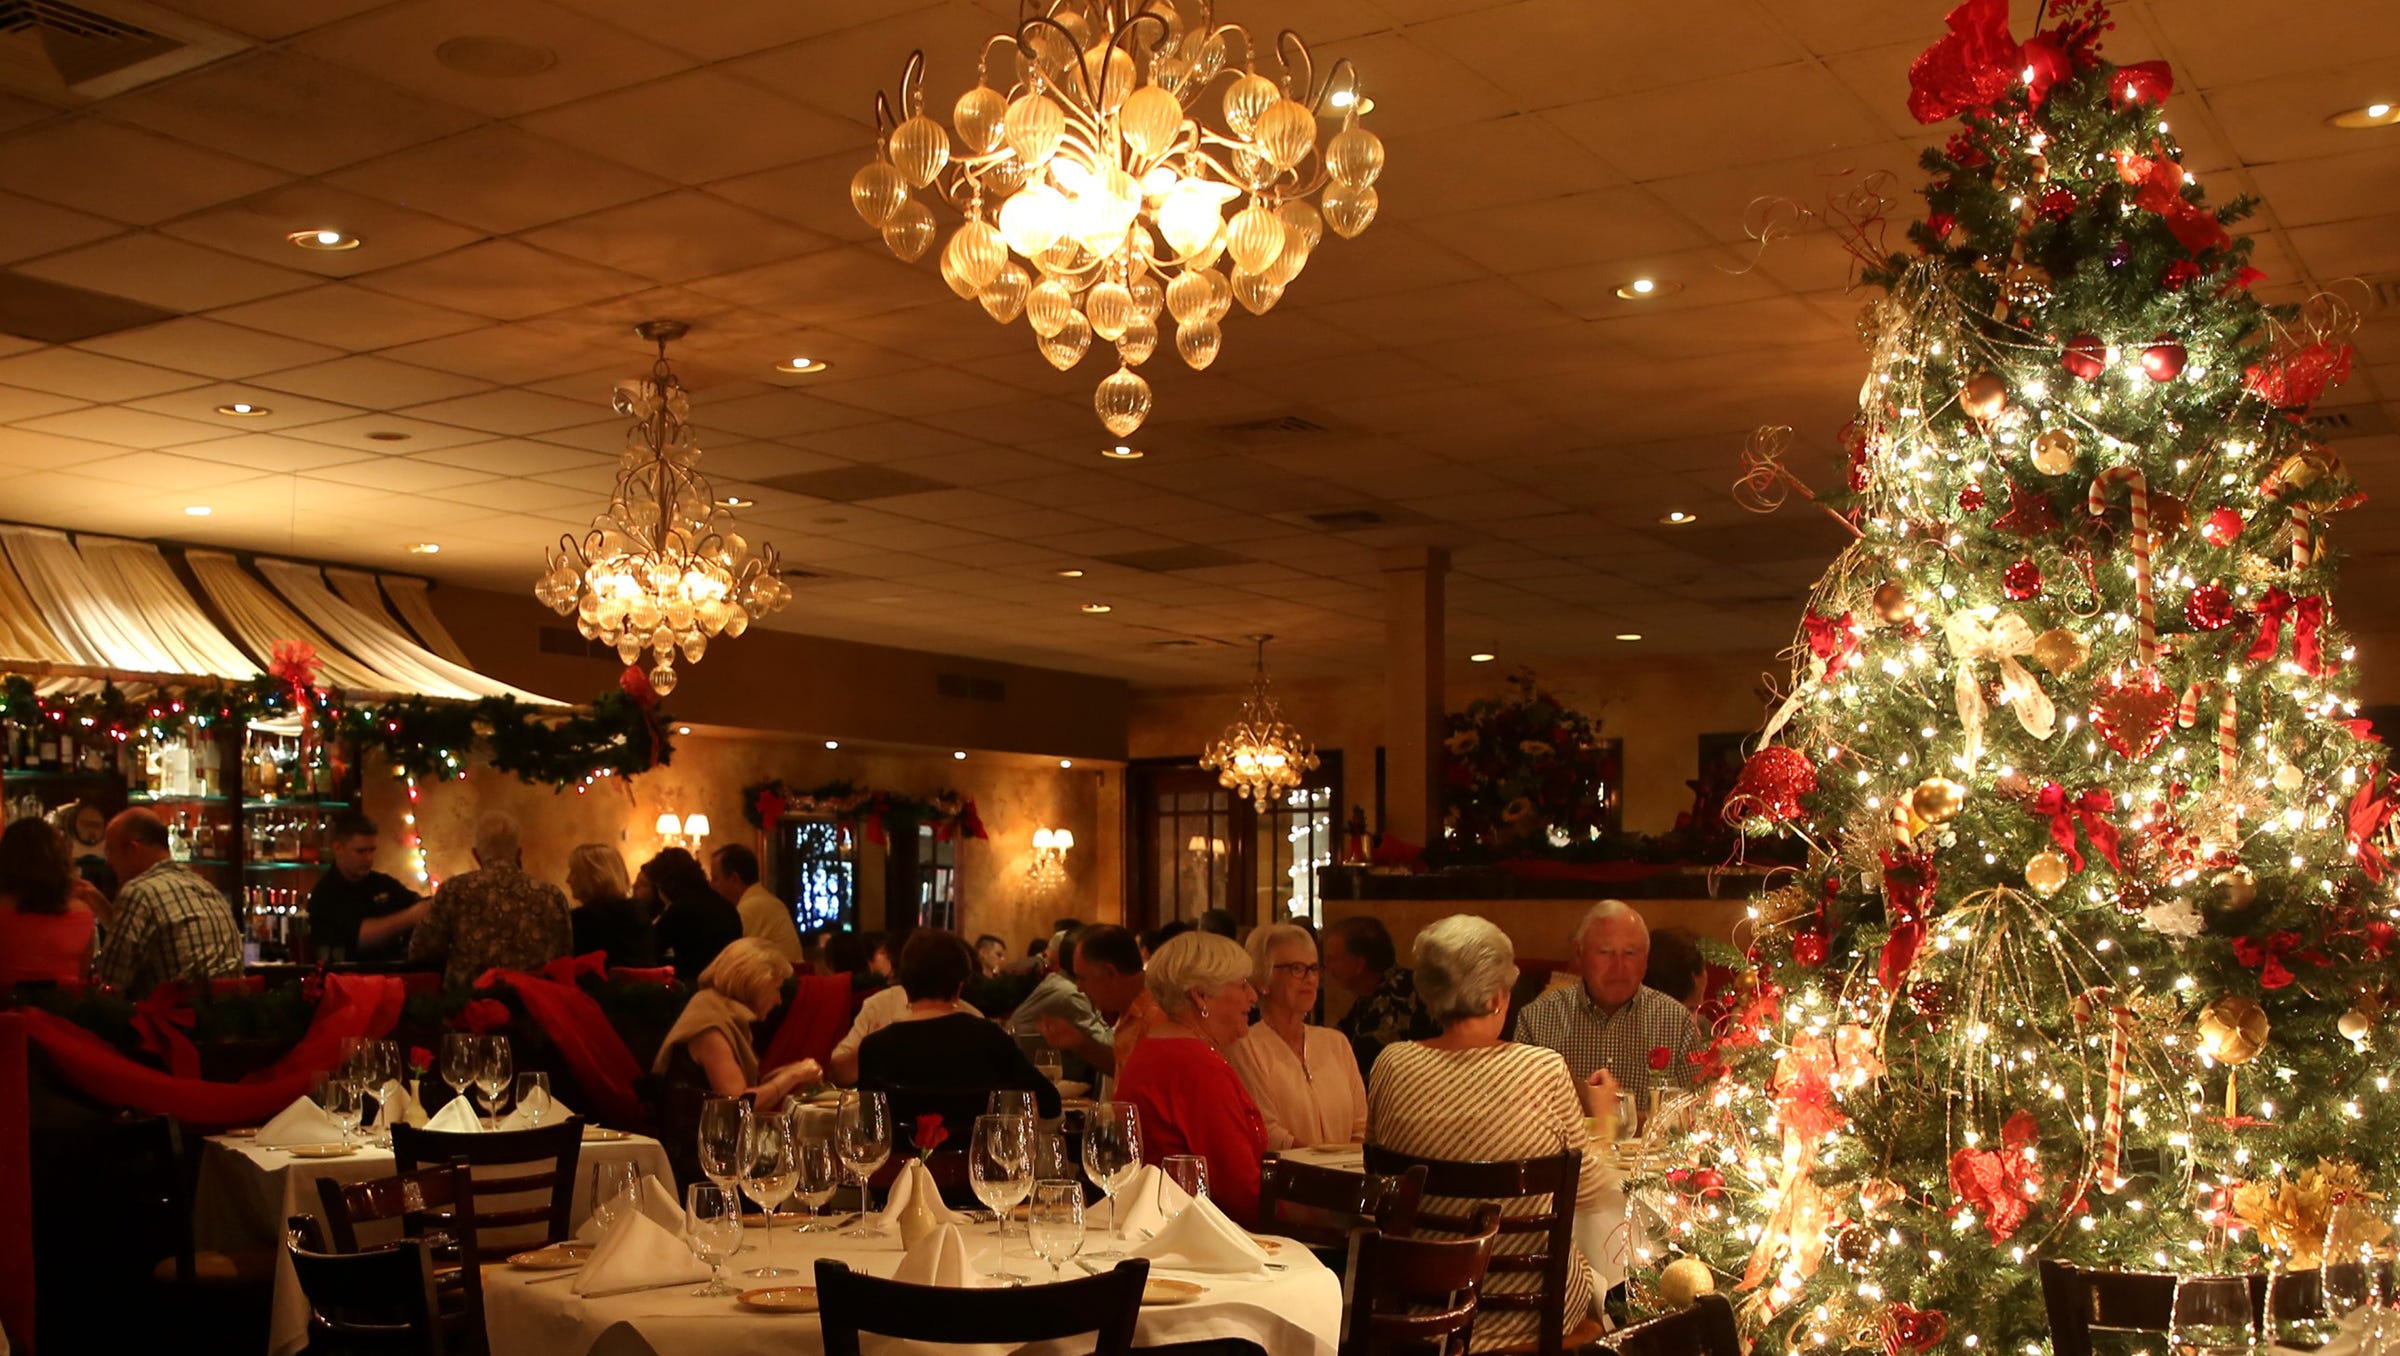 Erie restaurants are open on Christmas Eve, but Christmas Day is quiet